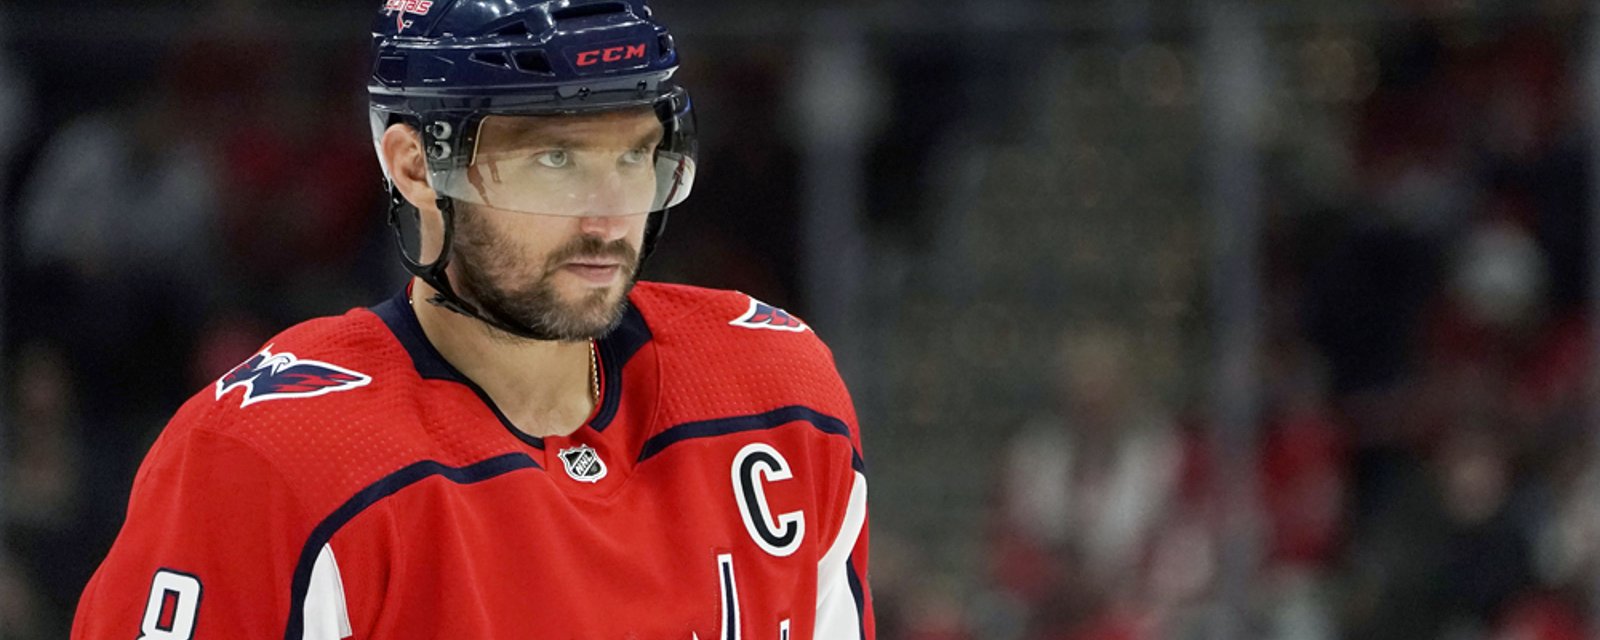 Ovechkin plans on finishing his career with a team other than the Capitals